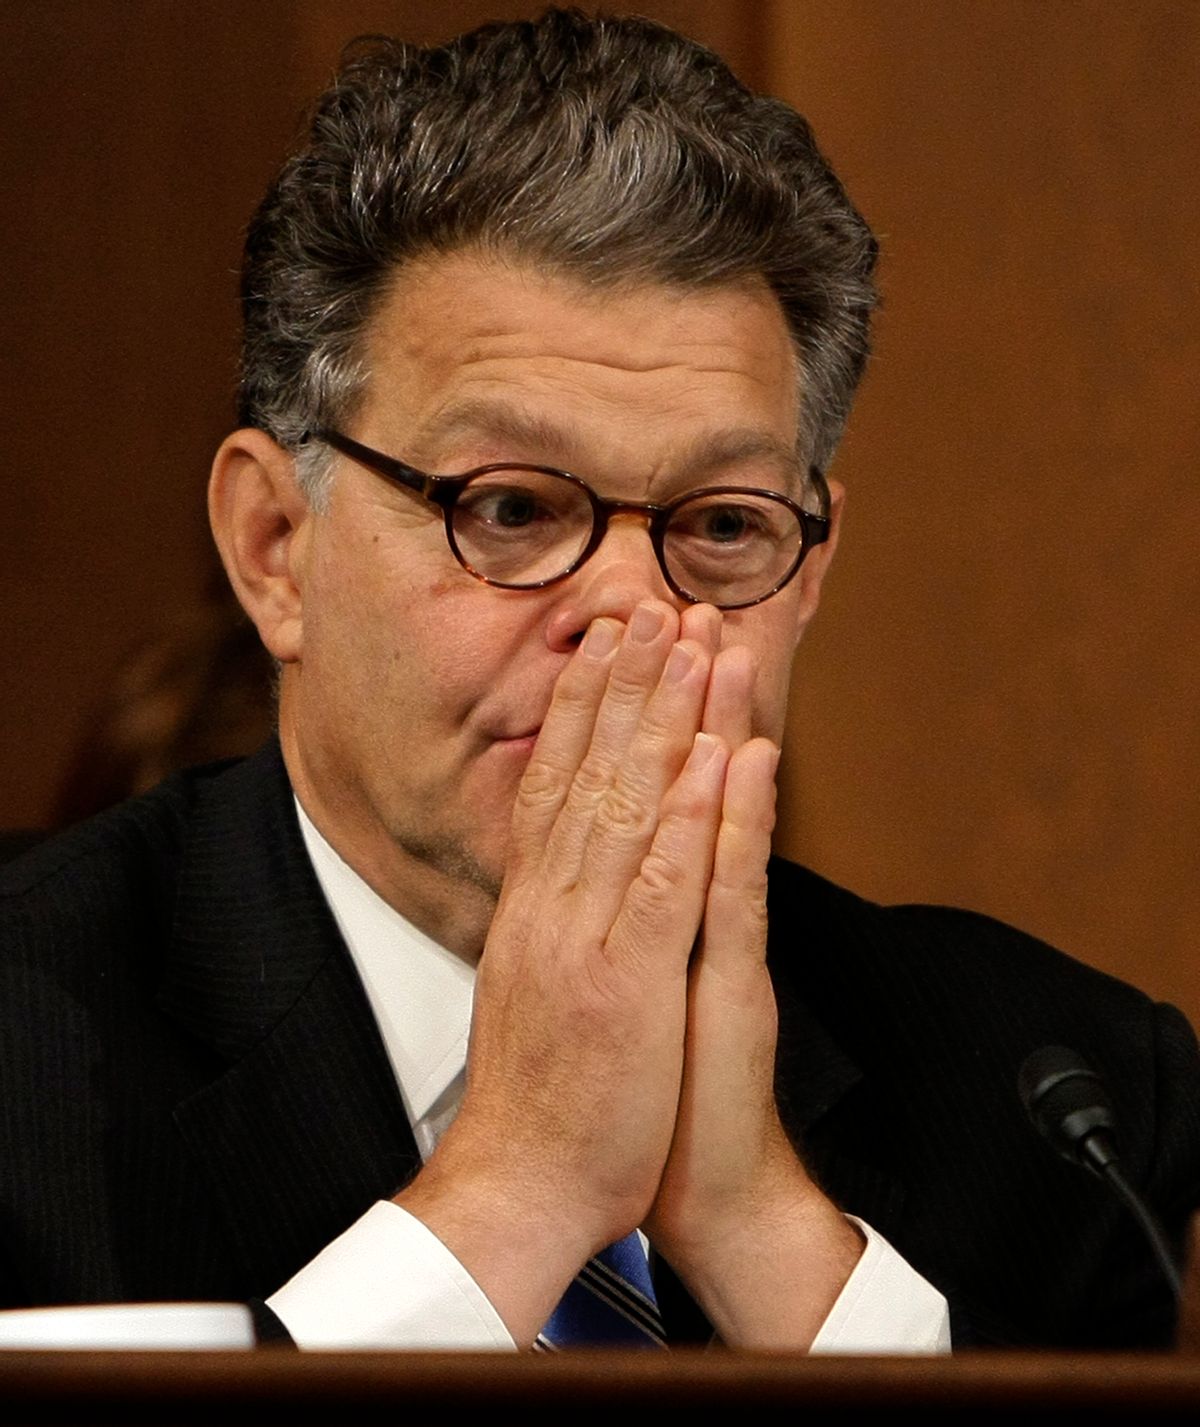 Sen. Al Franken, D-Minn., listens to testimony by Supreme Court nominee Sonia Sotomayor on the final day of her confirmation hearings, on Capitol Hill in Washington, Thursday, July 16, 2009. (AP Photo/J. Scott Applewhite)    (Associated Press)